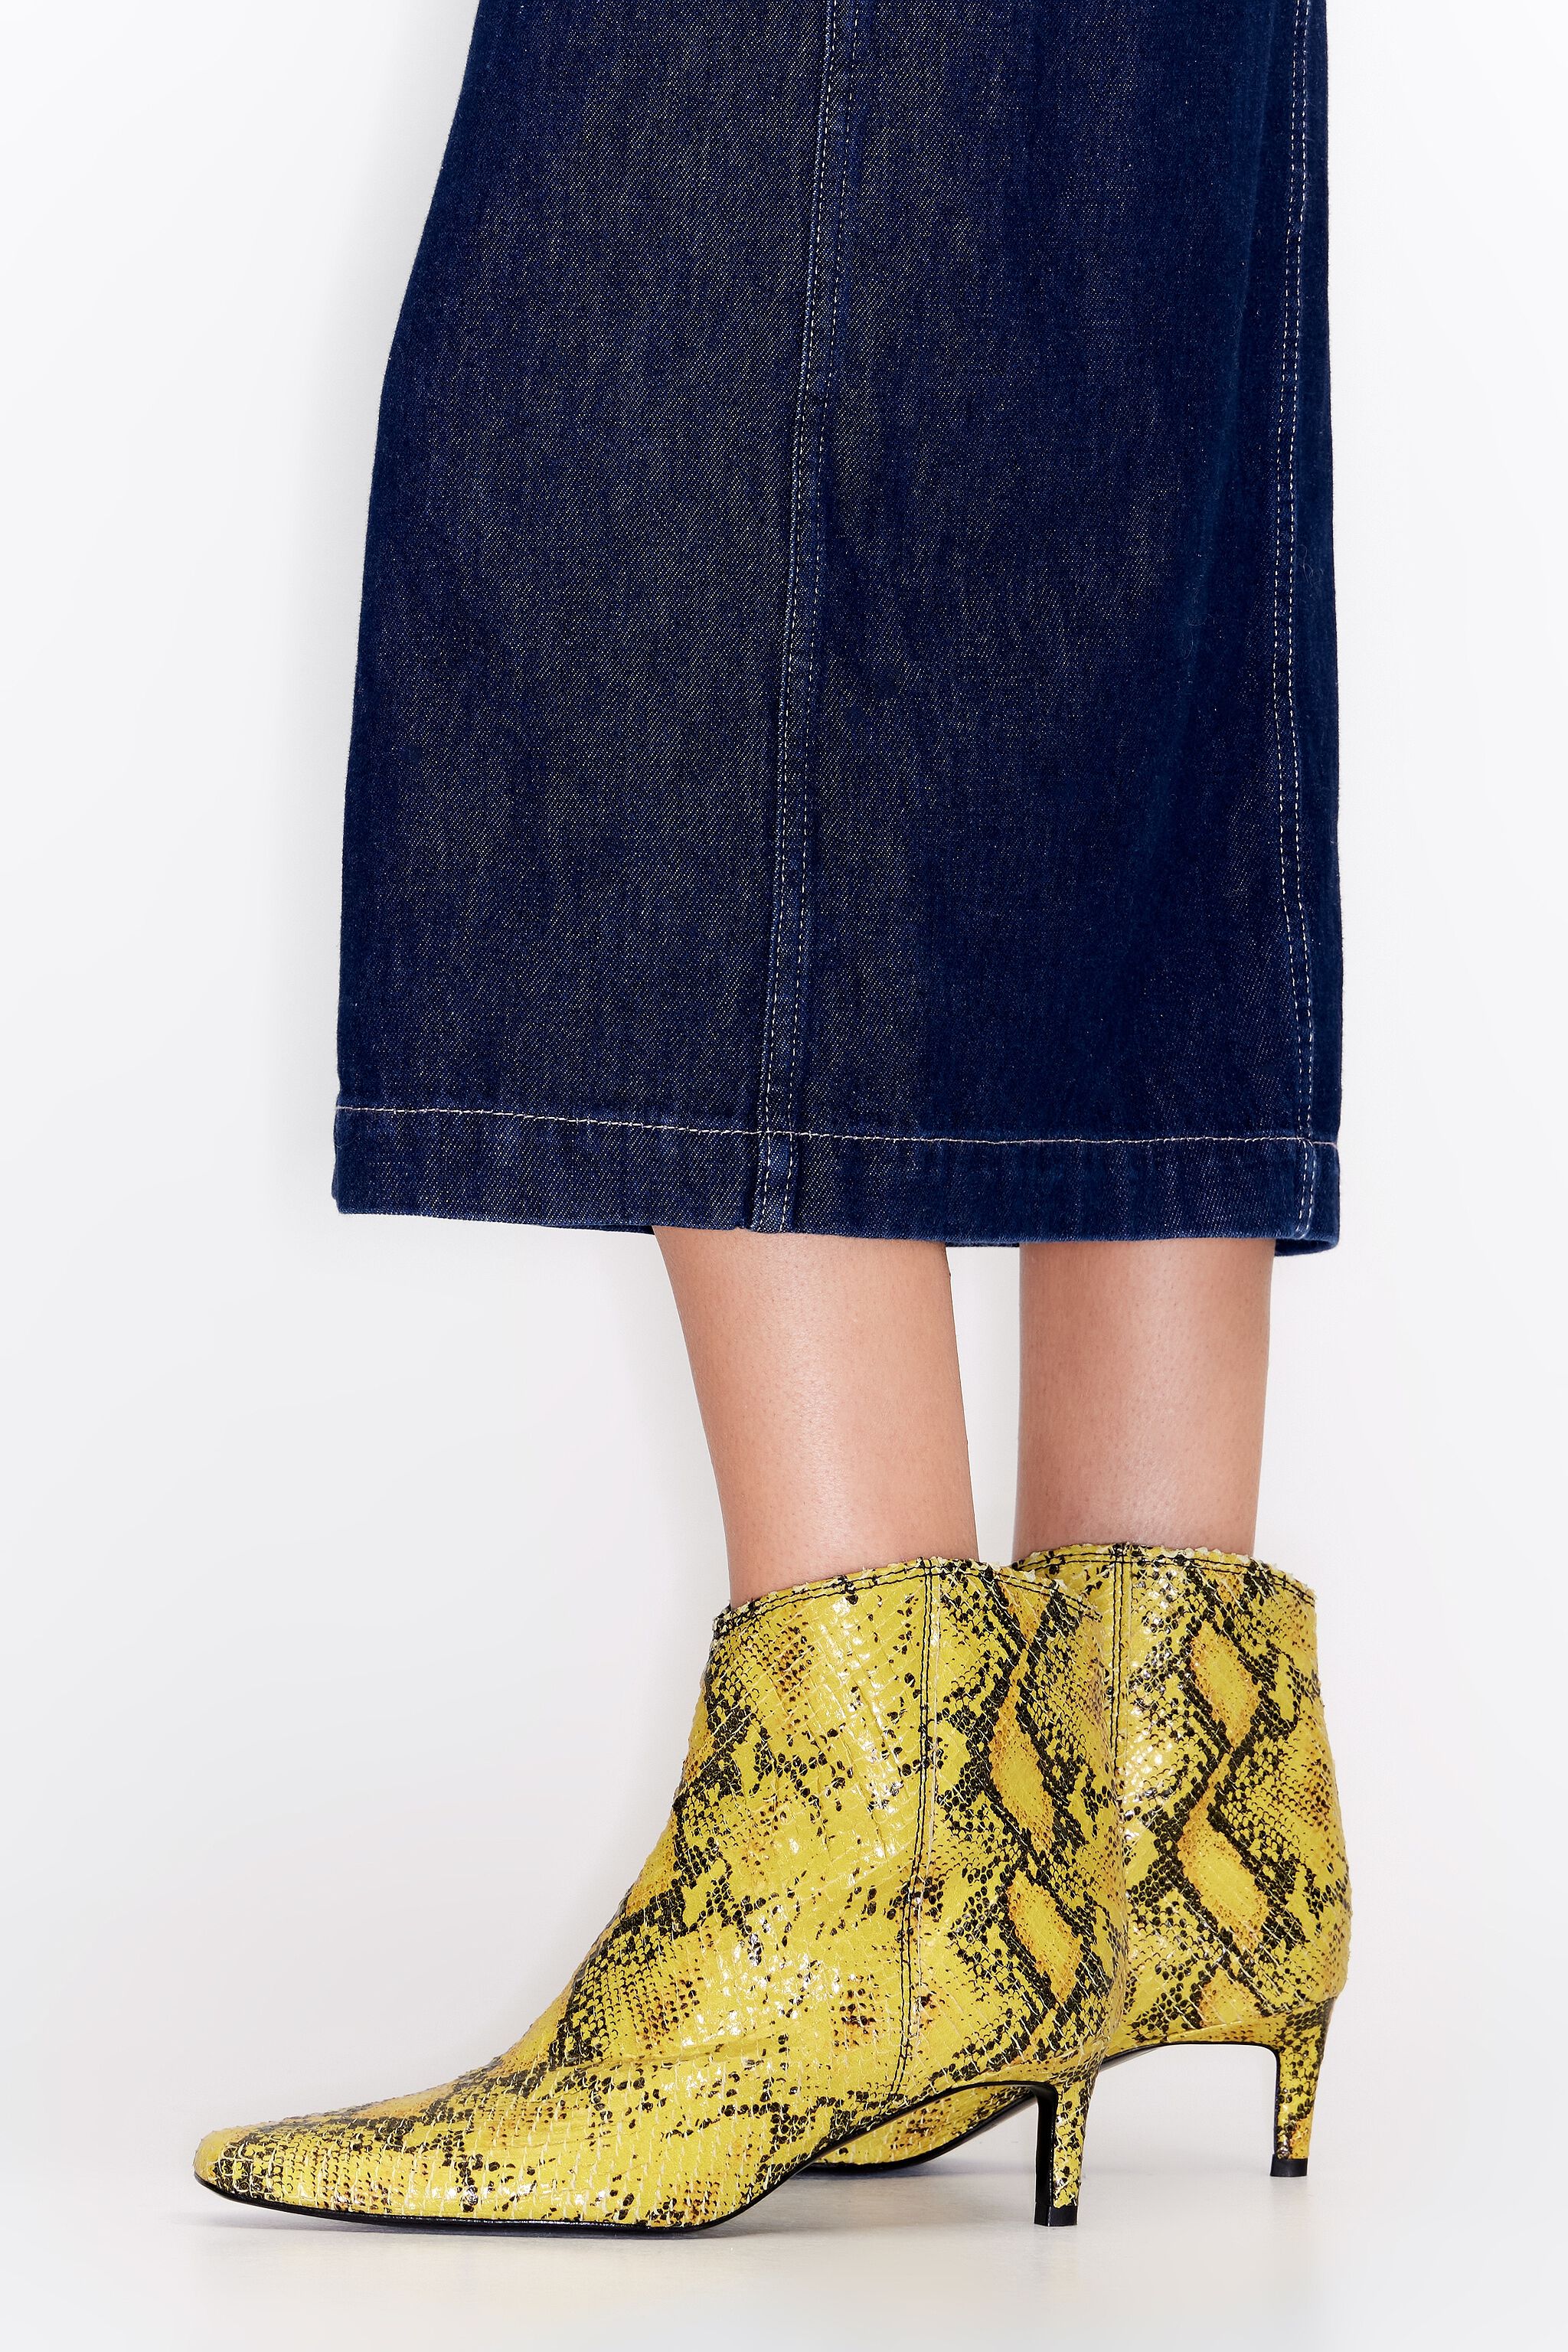 Public Desire Cardi Neon Yellow Croc Pointed Toe Zip Detail Knee High Boots  | Lyst